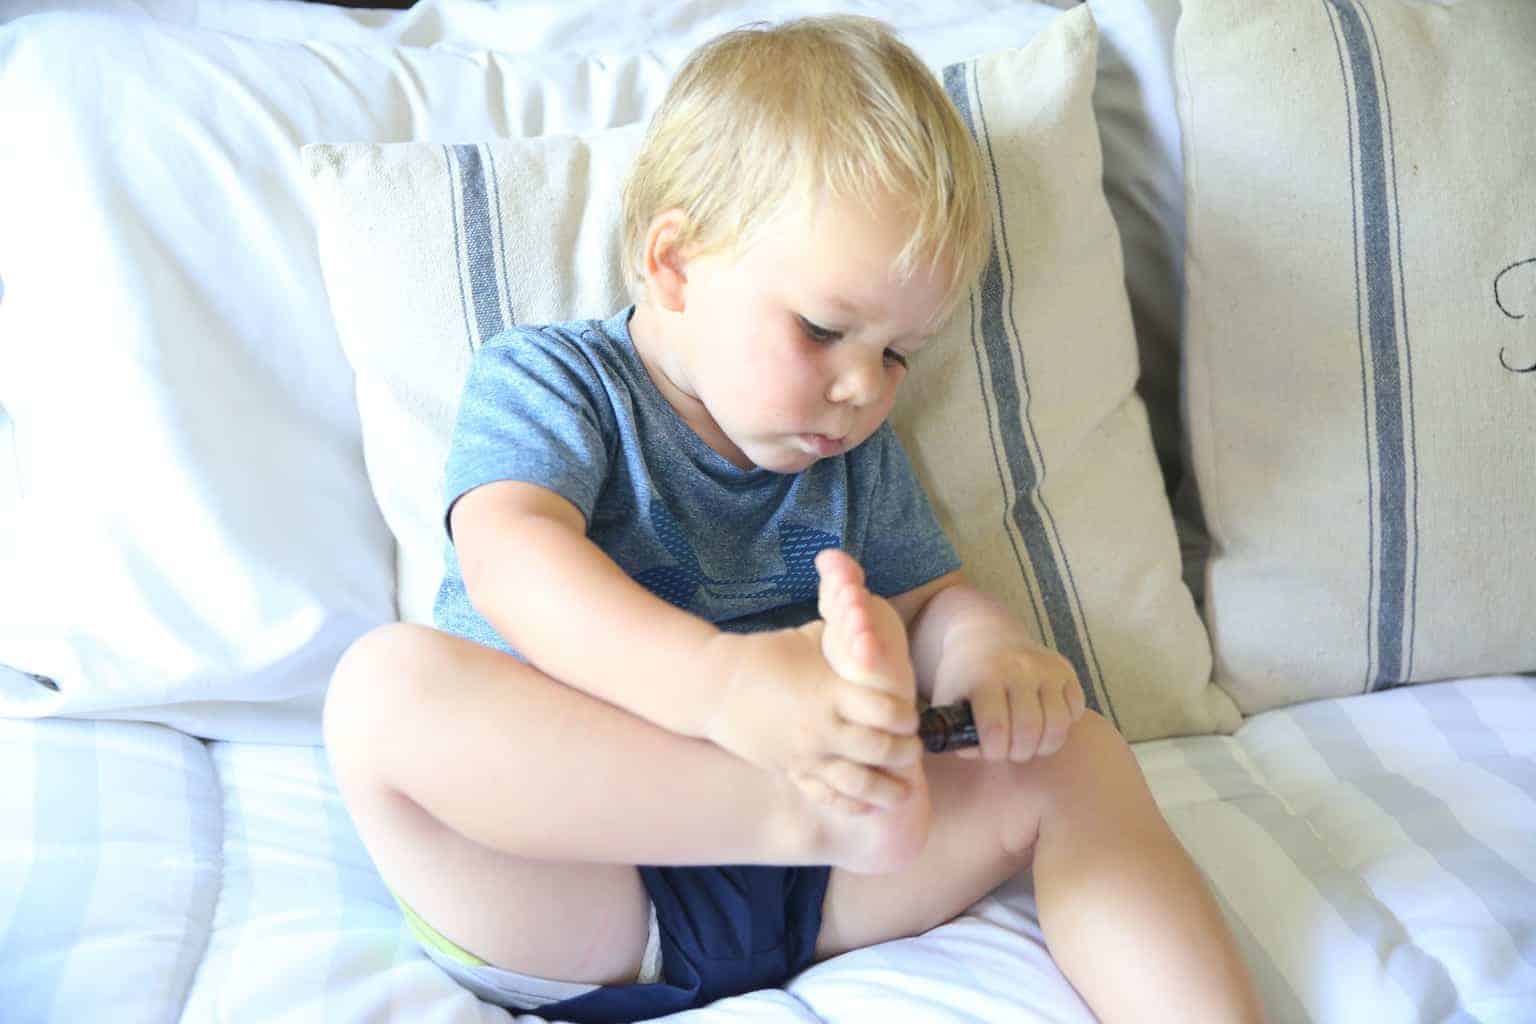 A little boy putting a roller bottle essential oil on his feet.